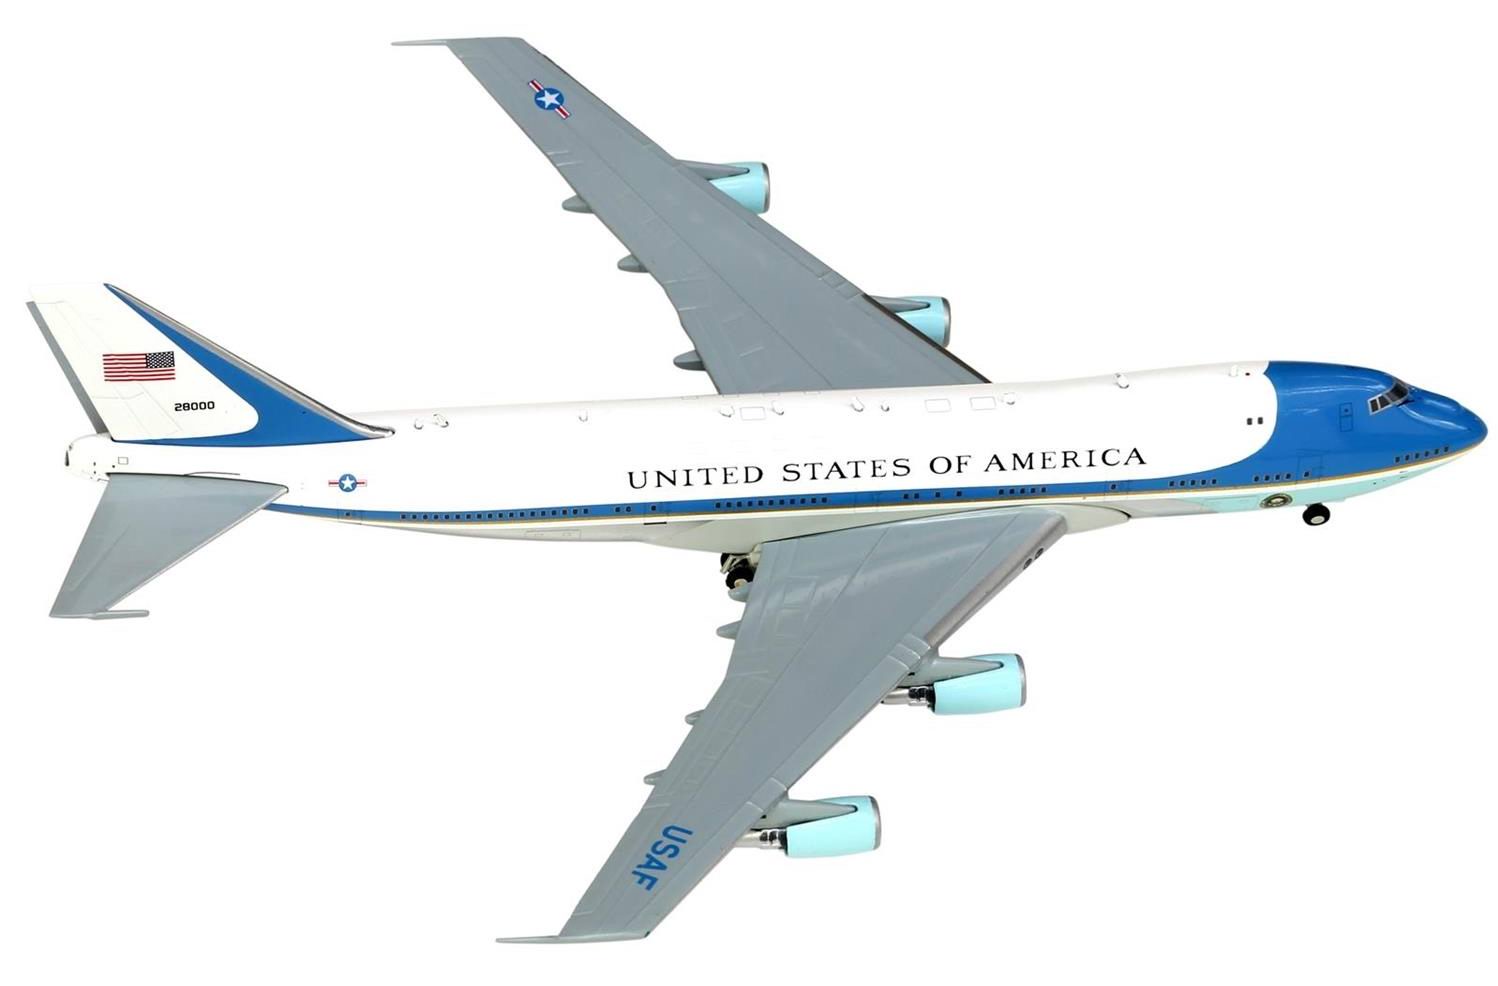 BOEING 747-200 AIR FORCE ONE 28000 1/400